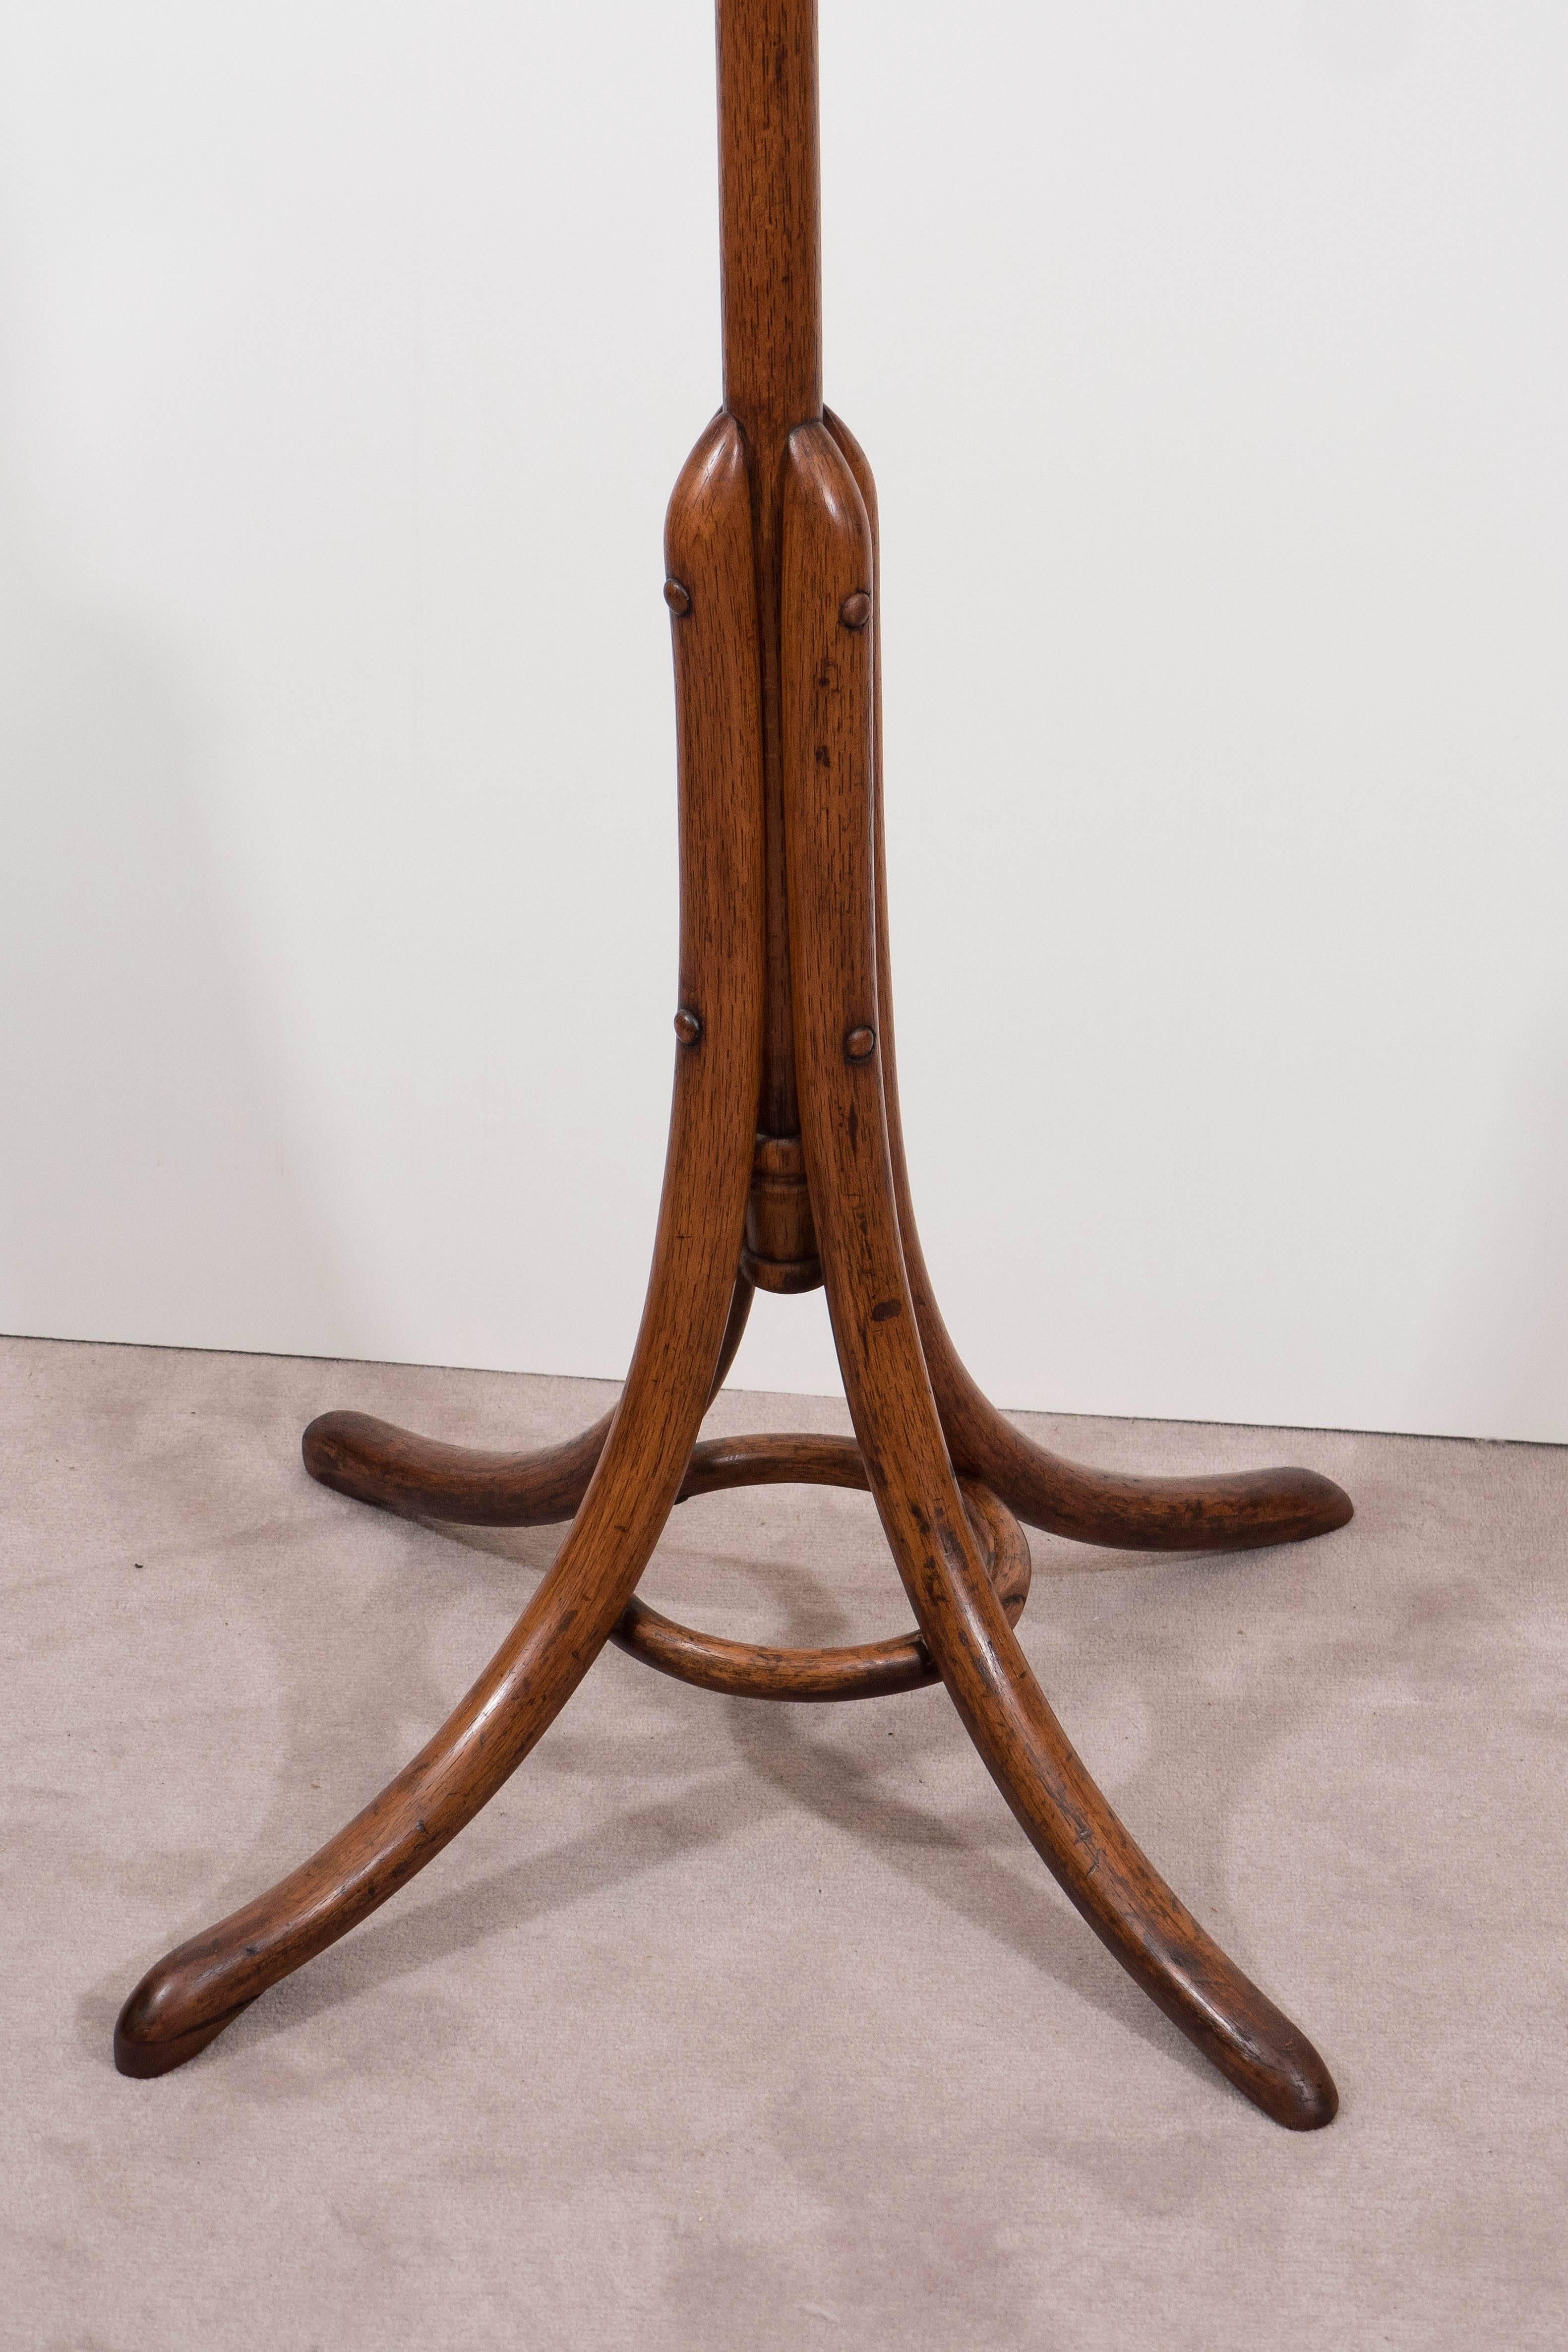 An Austrian bentwood coat rack and hall tree, produced circa 1900s by Thonet, which features six scrolled hooks, surmounted by a beehive finial. Very good antique condition, with age appropriate wear.